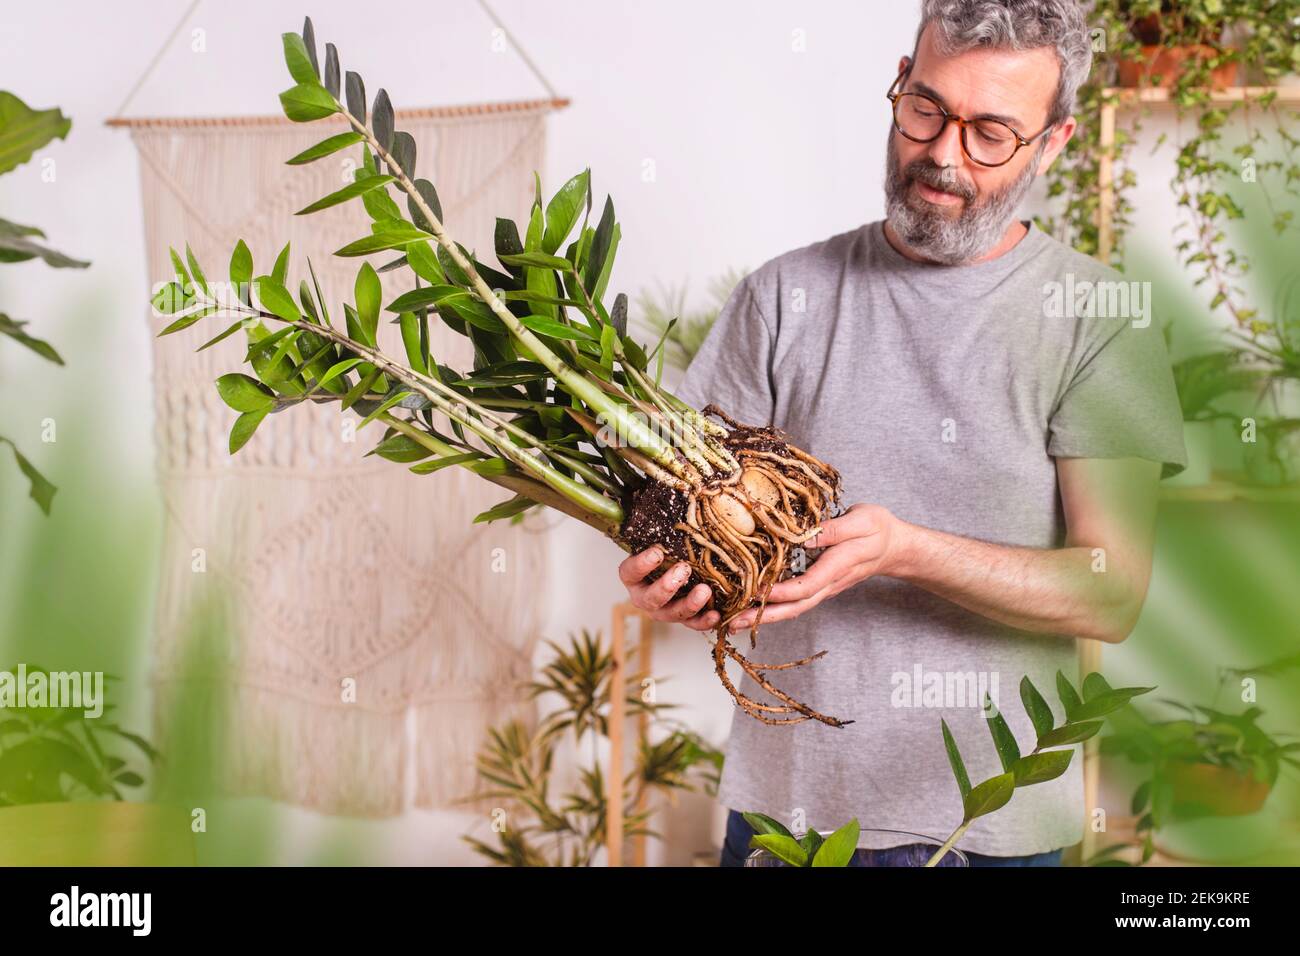 Mature man examining roots of Zamioculcas Zamiifolia plant while standing at home Stock Photo